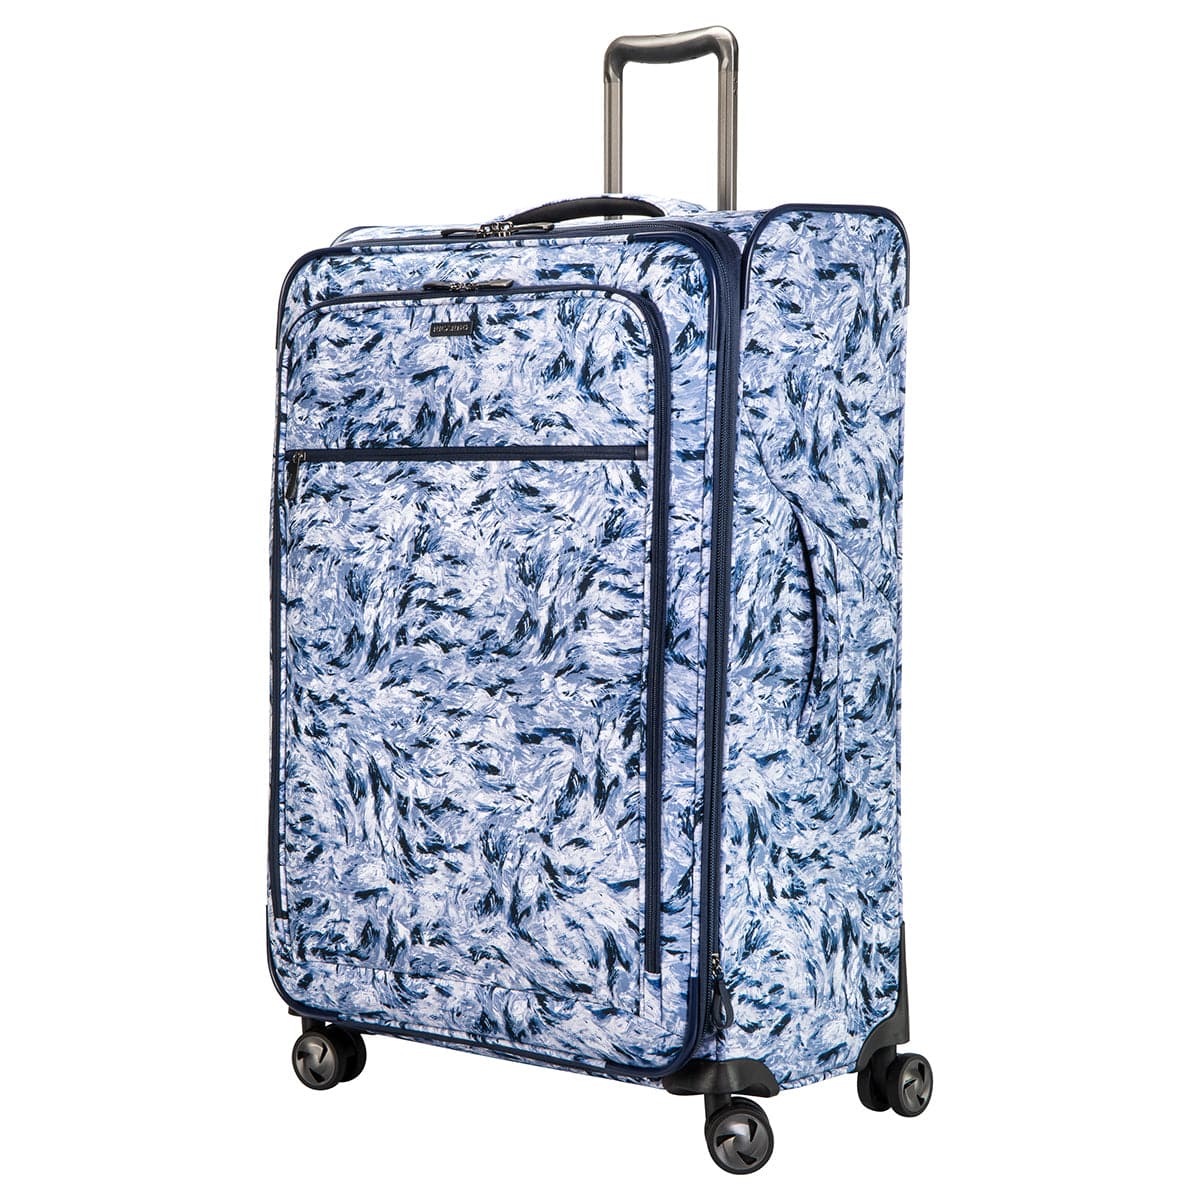 Ricardo Beverly Hills Seahaven 2.0 Softside Large Check-In Luggage